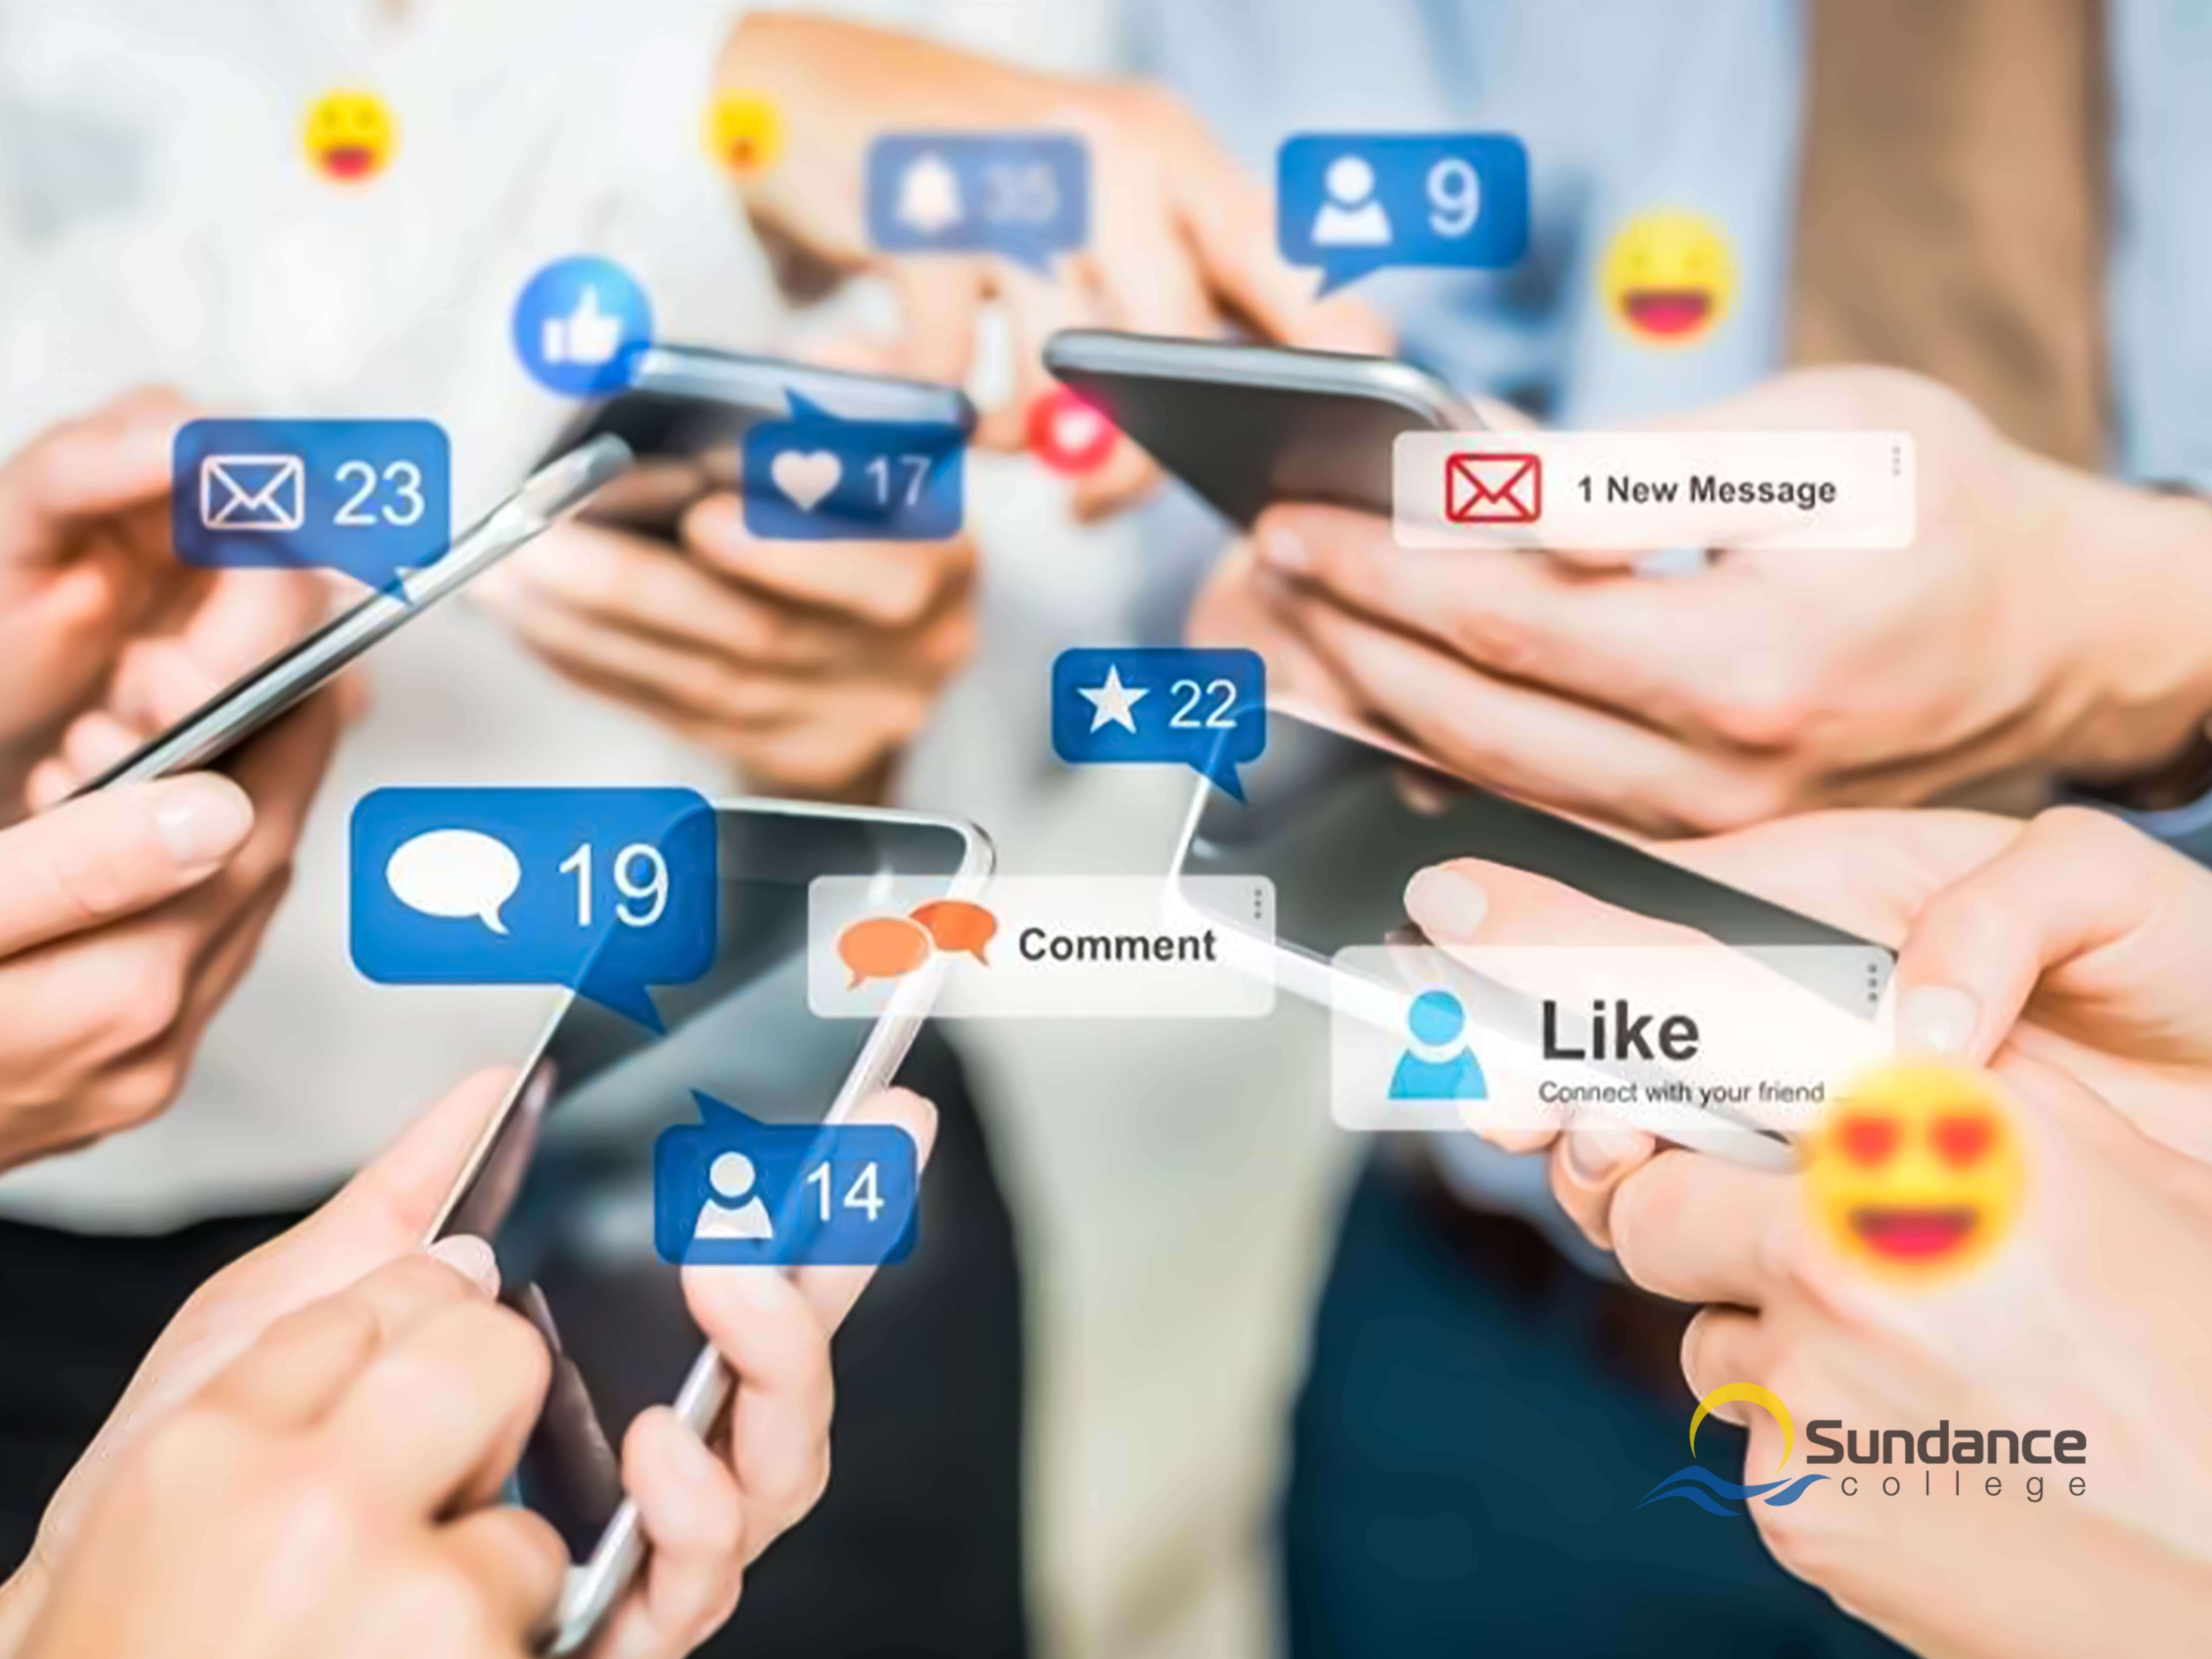 concept of social media represented by smartphones held by users closely together, connection people through messages, social media feeds, and social media reaction features